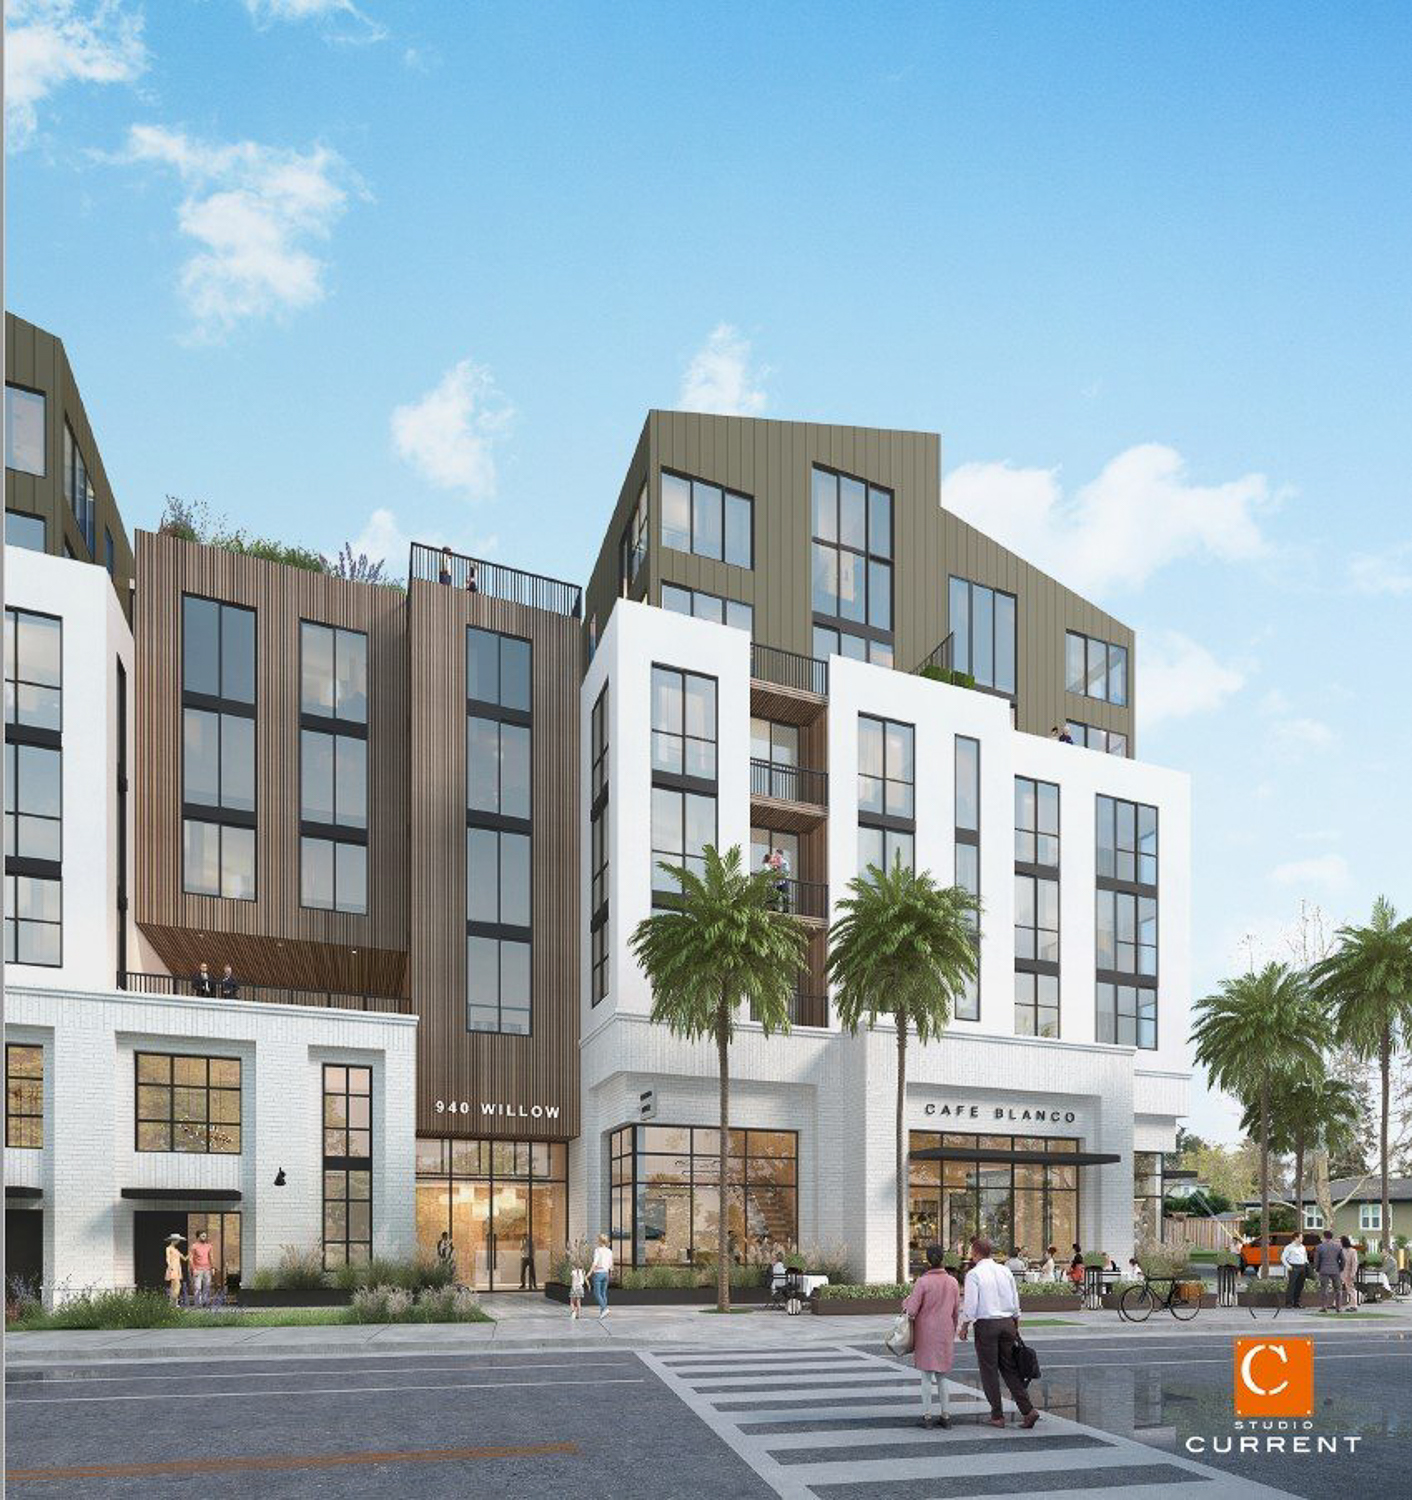 940 Willow Street cross-walk view facing the retail space, rendering by Studio Current